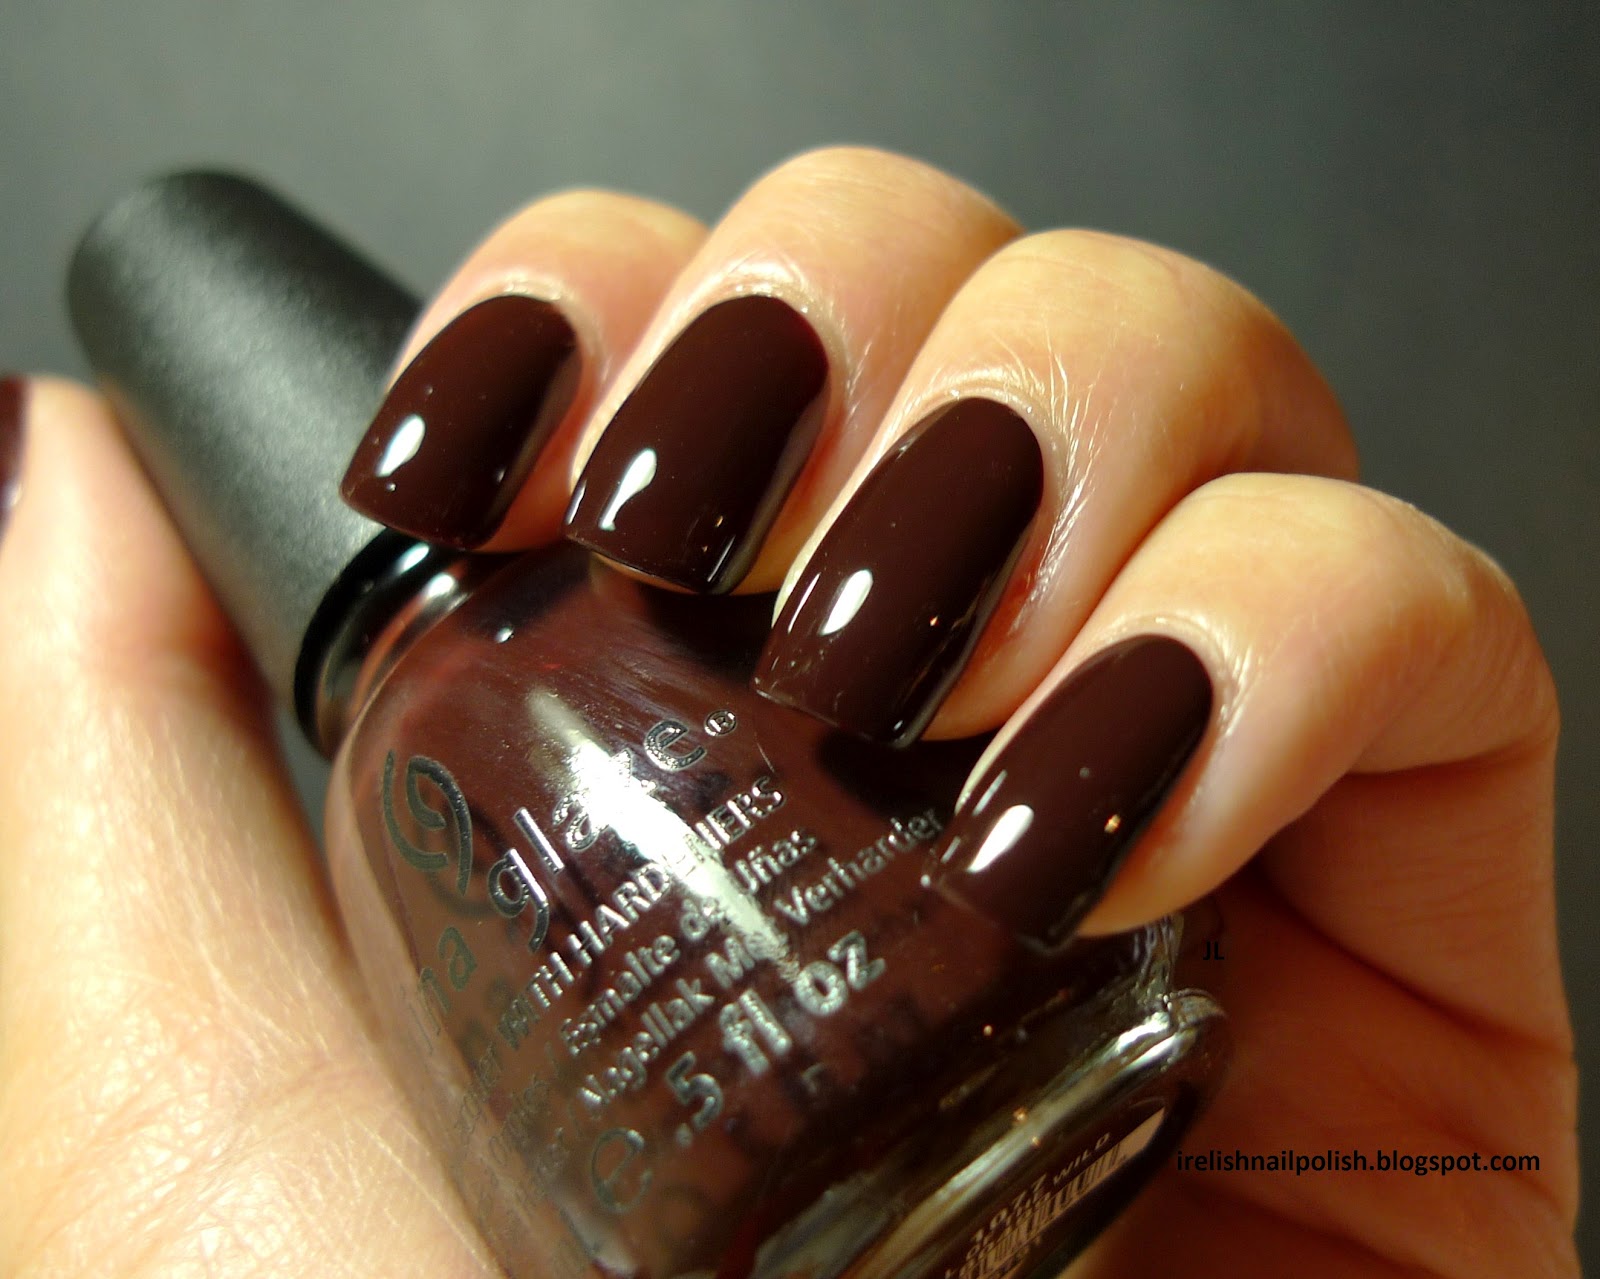 8. "Chocolate Brown" - wide 8